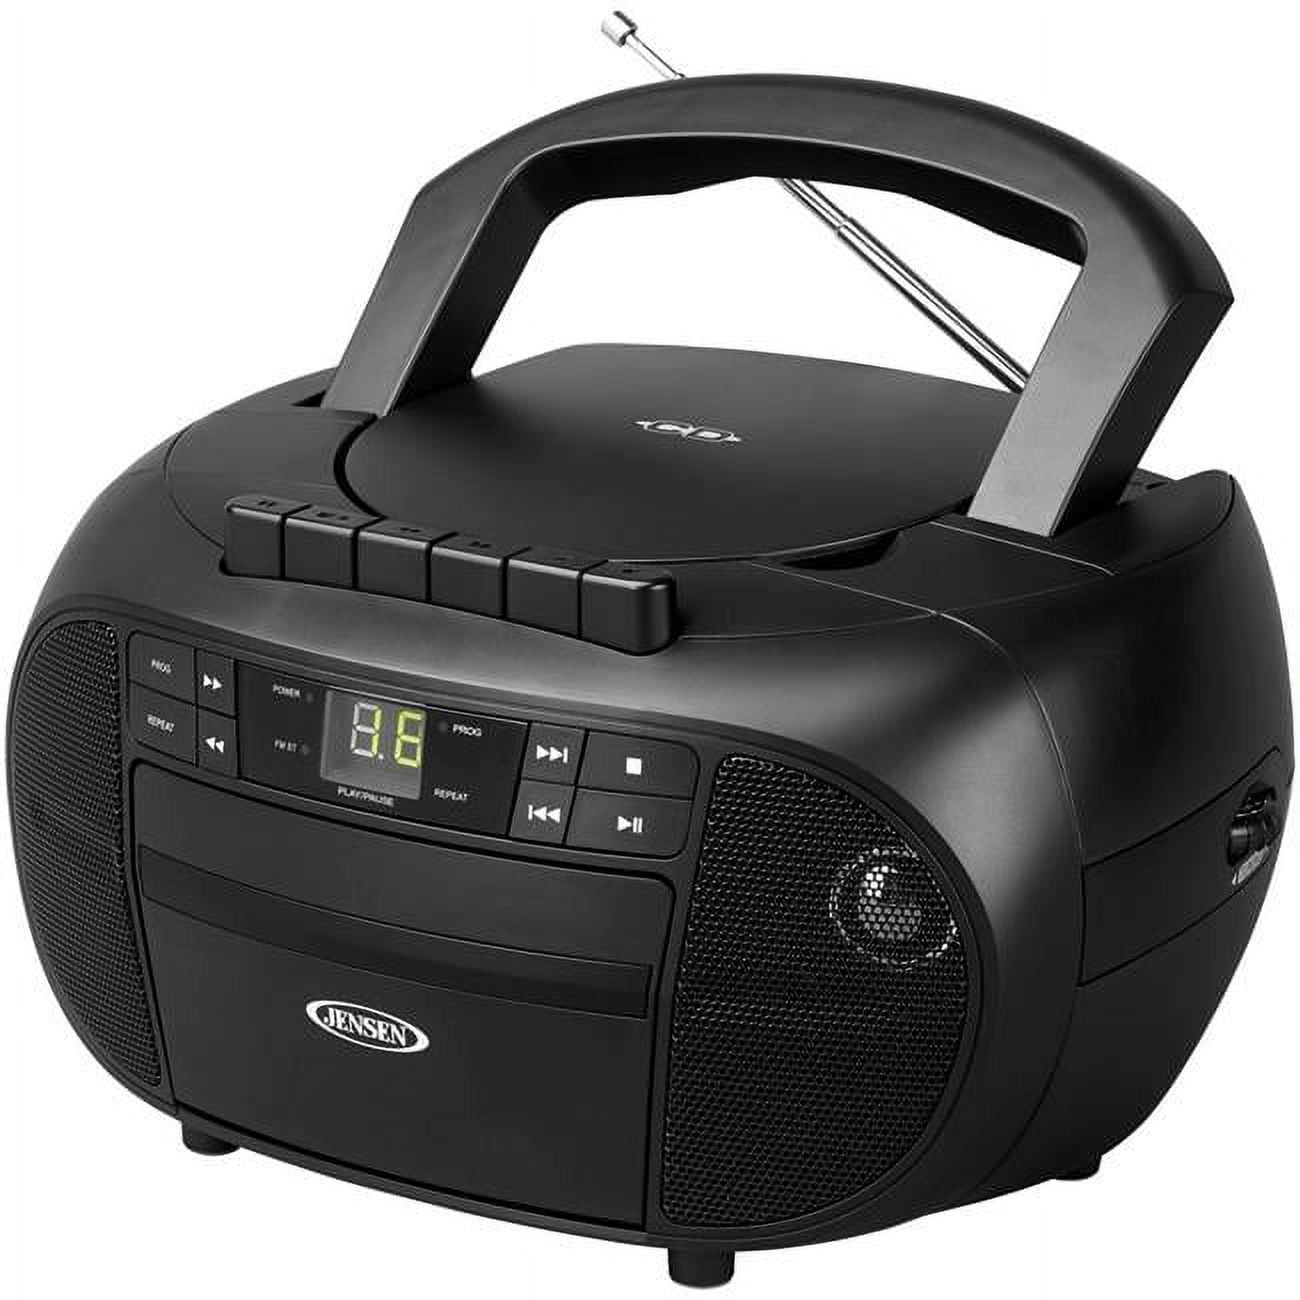 JENSEN Portable Boombox/Stereo Cassette Recorder & CD Player with AM/FM  Radio, Black 